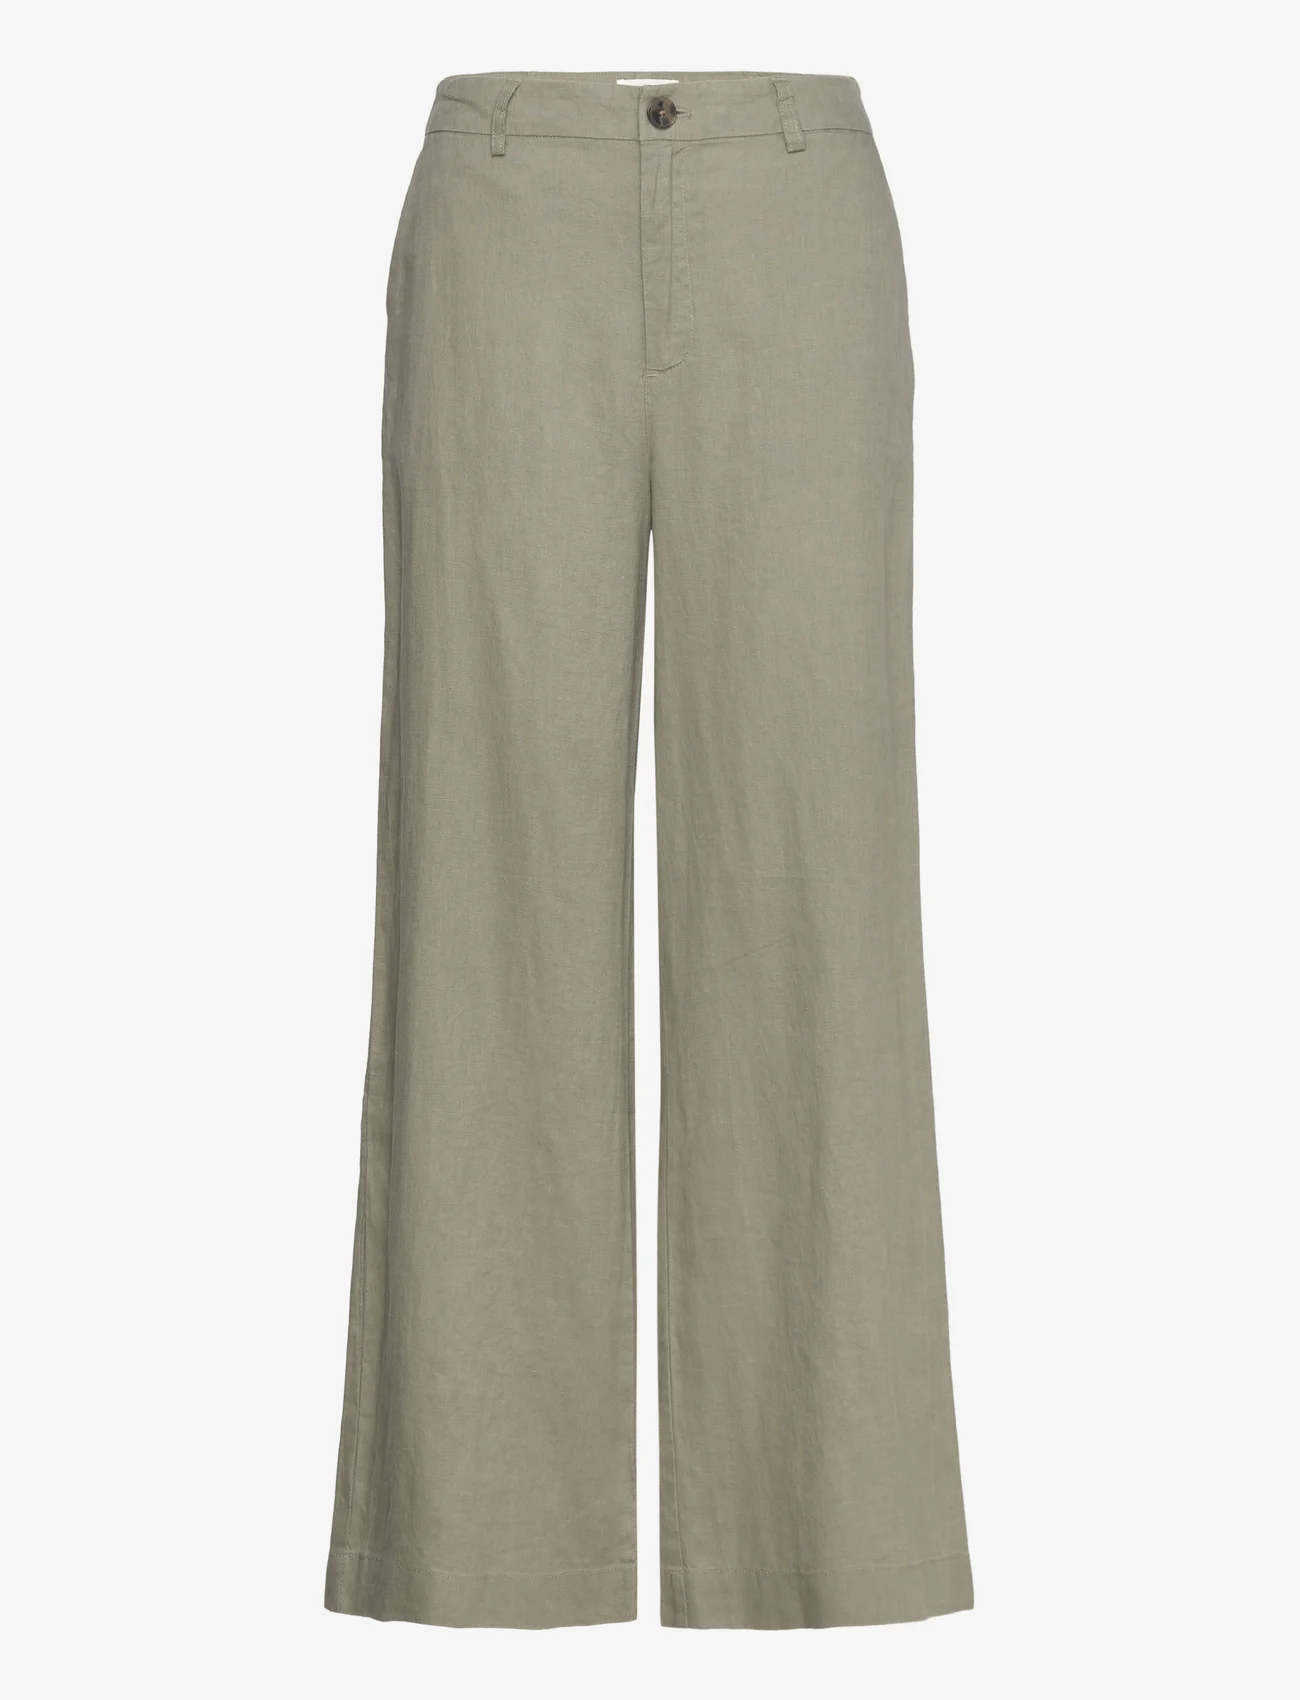 Part Two - NinnesPW PA - linen trousers - vetiver - 0